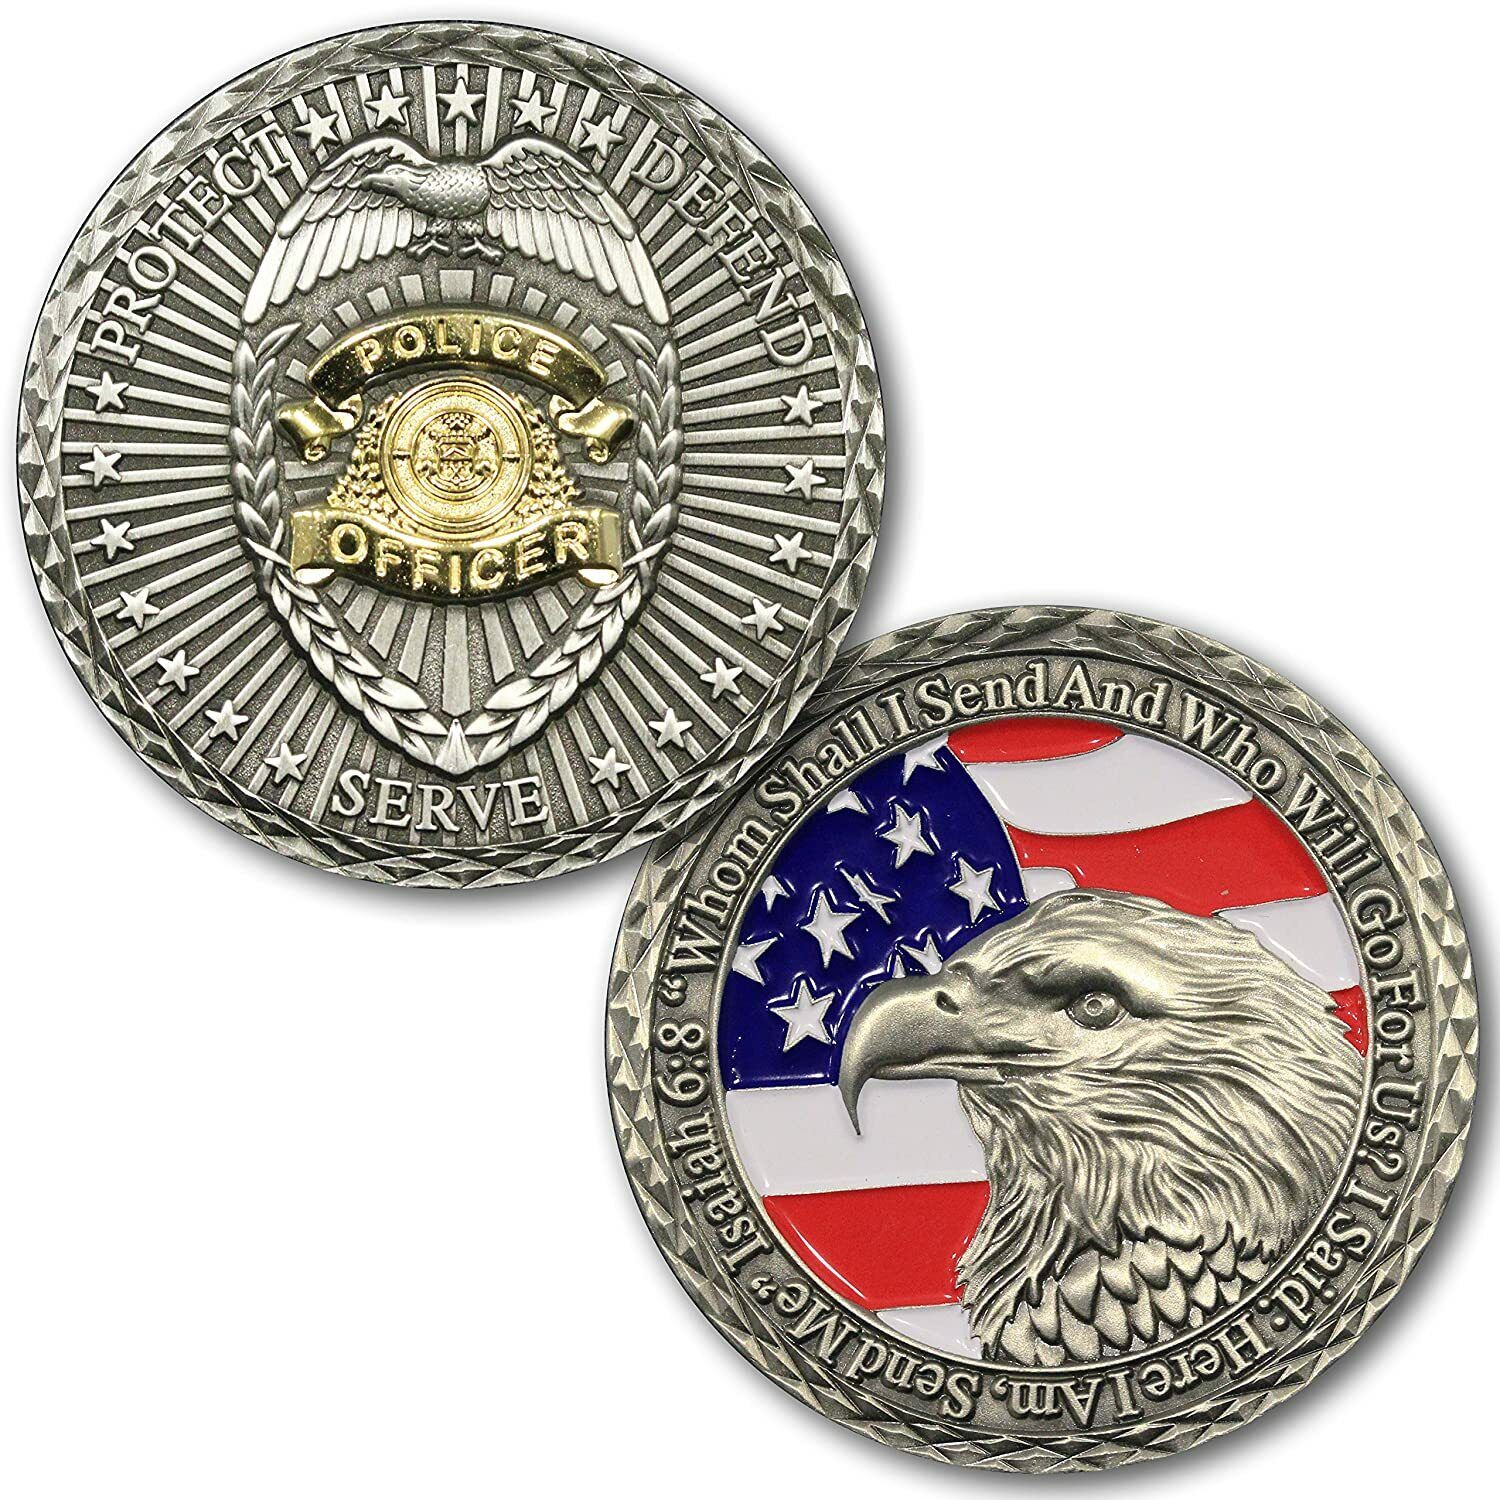 Police Officer Dedication Challenge Coin